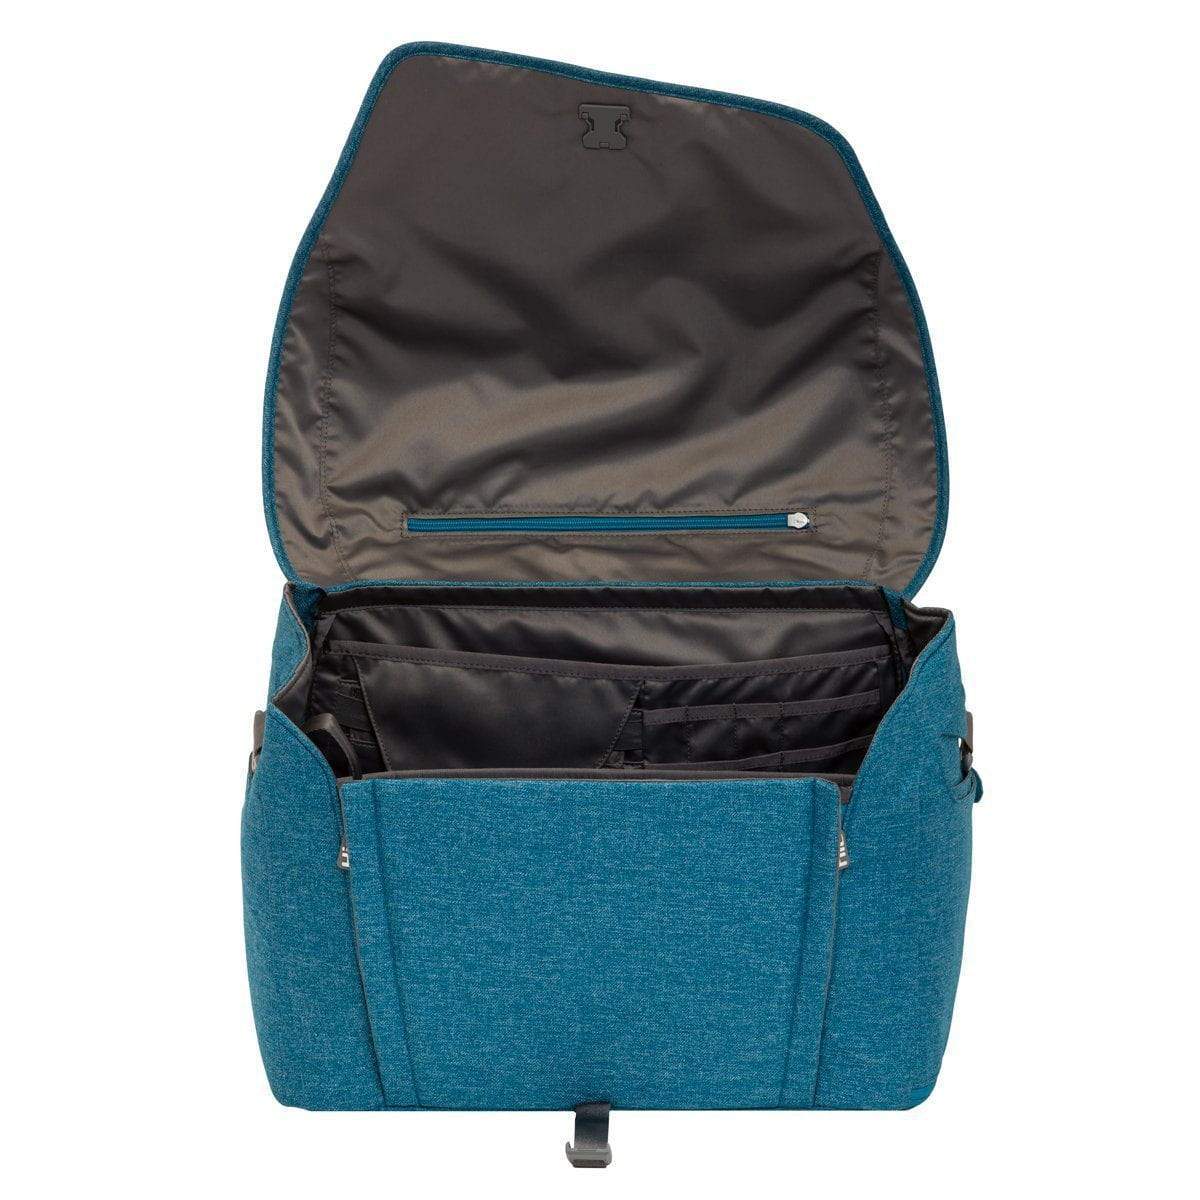 Hie Diaper Bag in the color Bay showing the lid open. 